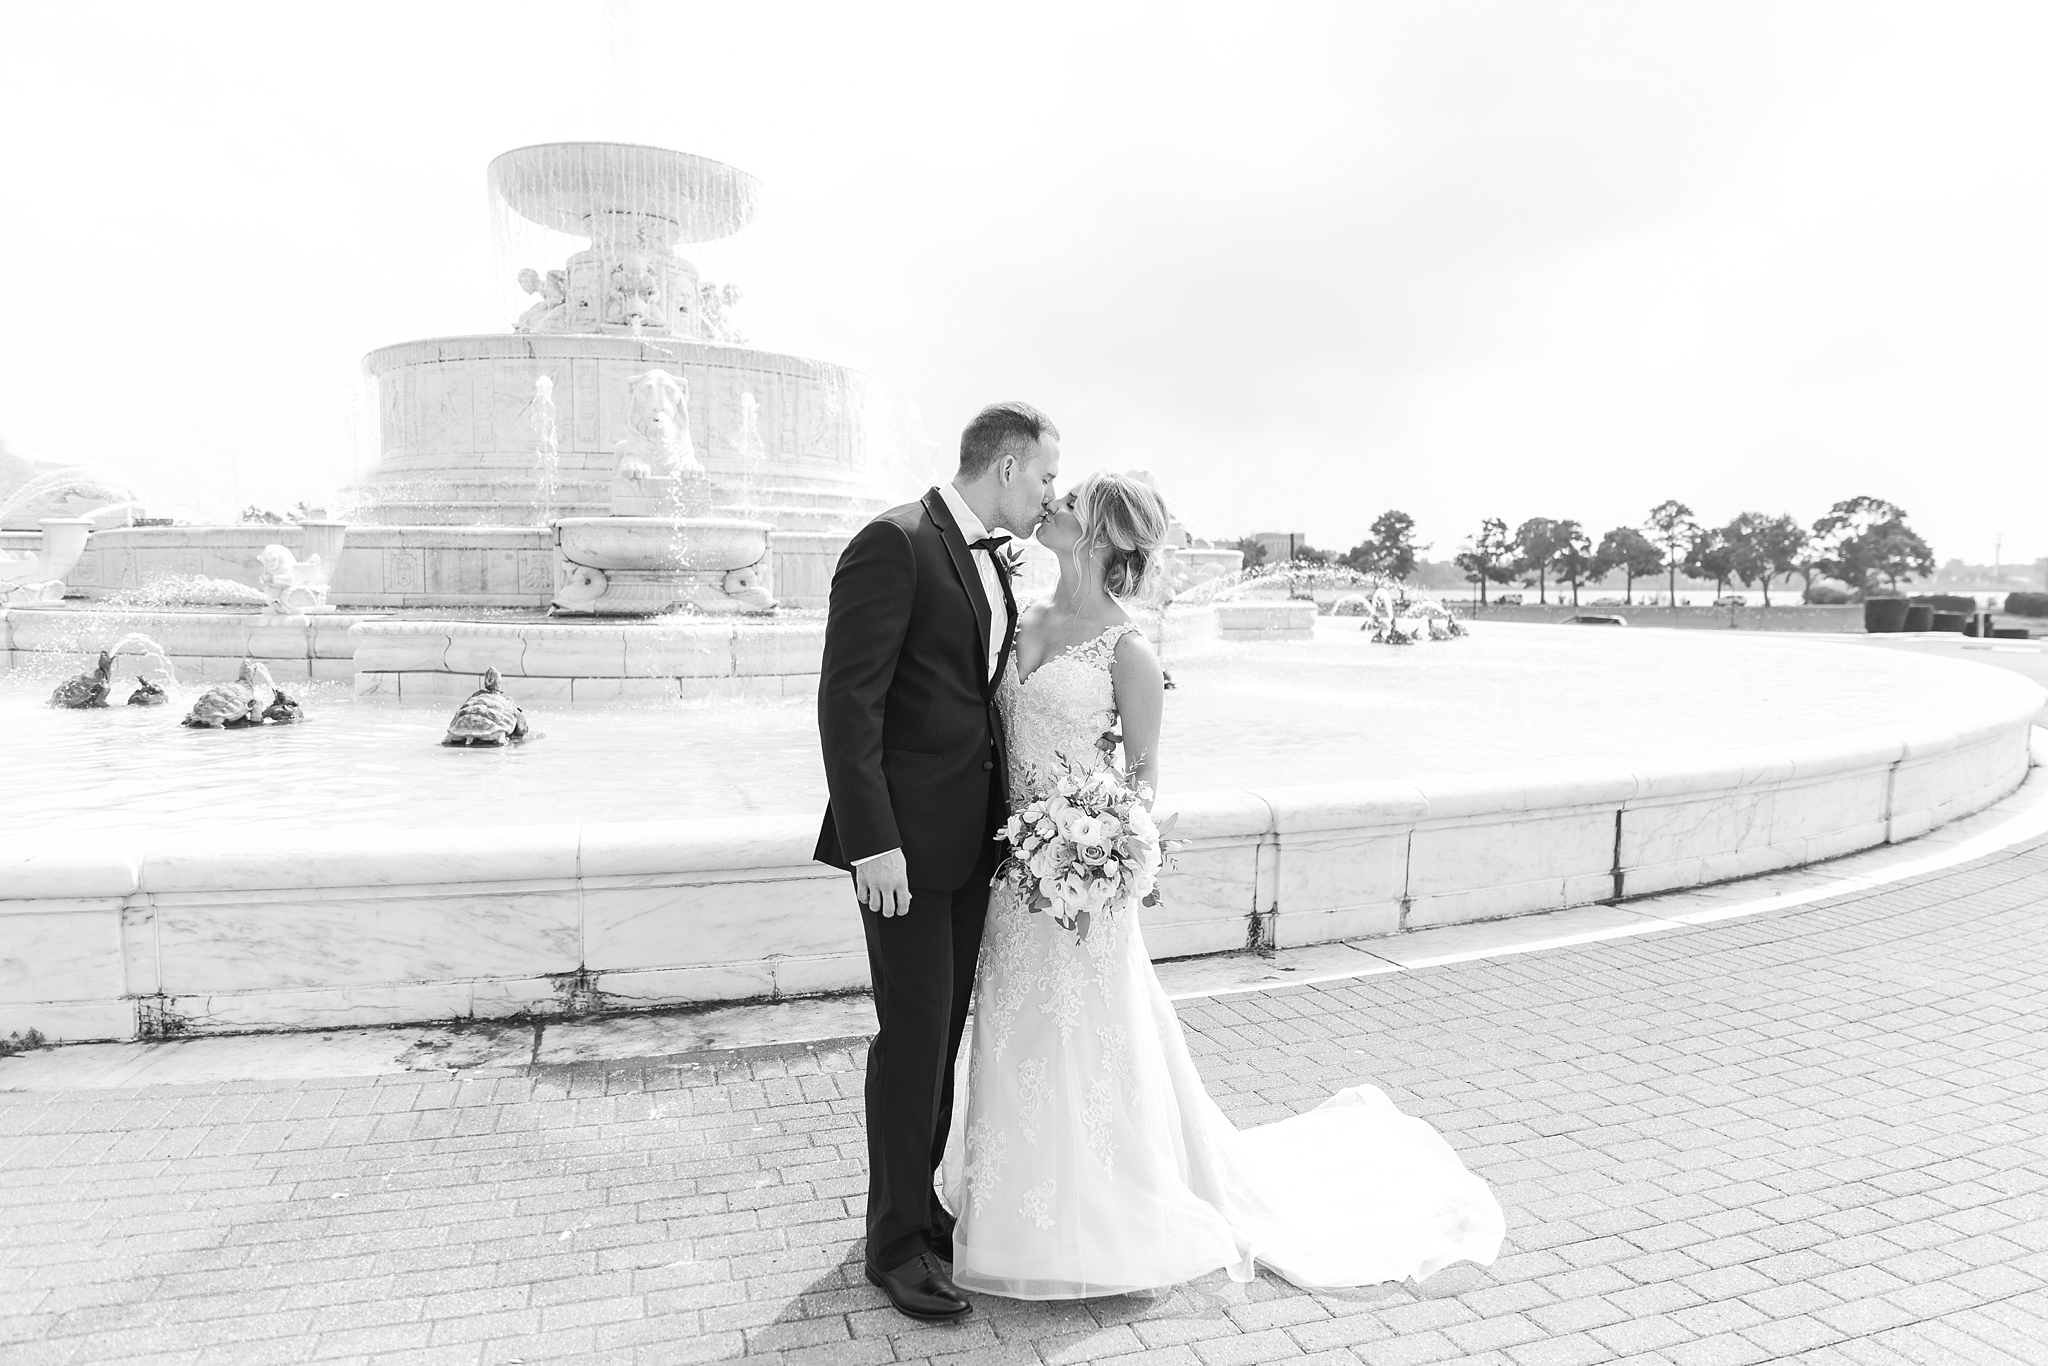 candid-romantic-wedding-photos-at-the-masonic-temple-belle-isle-detroit-institute-of-arts-in-detroit-michigan-by-courtney-carolyn-photography_0038.jpg